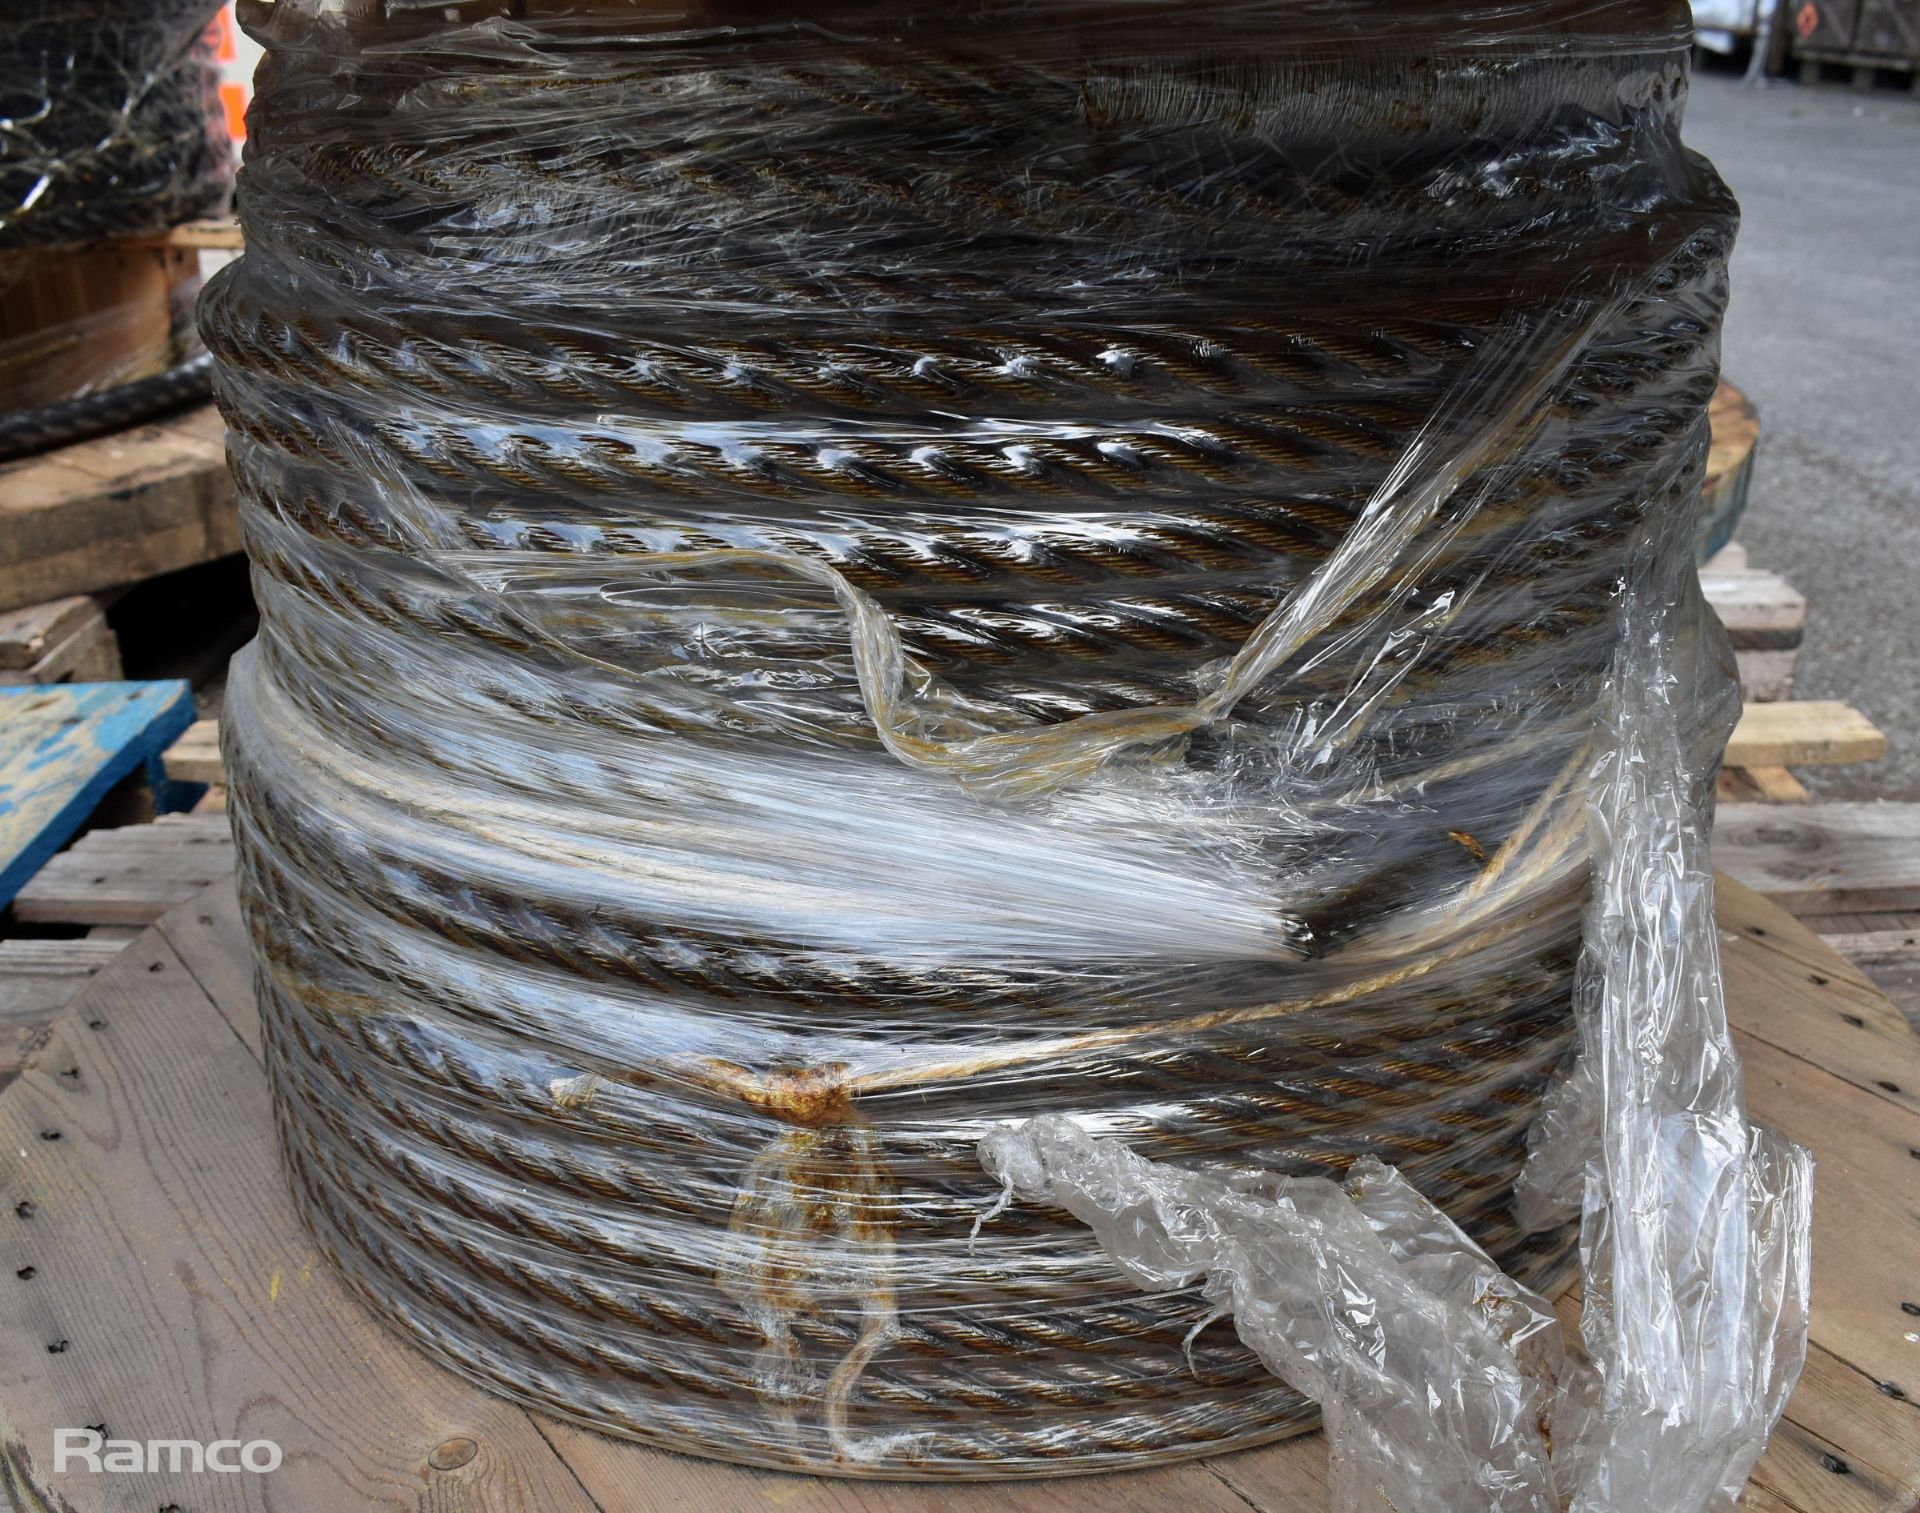 24mm 6 strand galvanised steel wire rope reel - approx weight: 300kg - Image 3 of 4